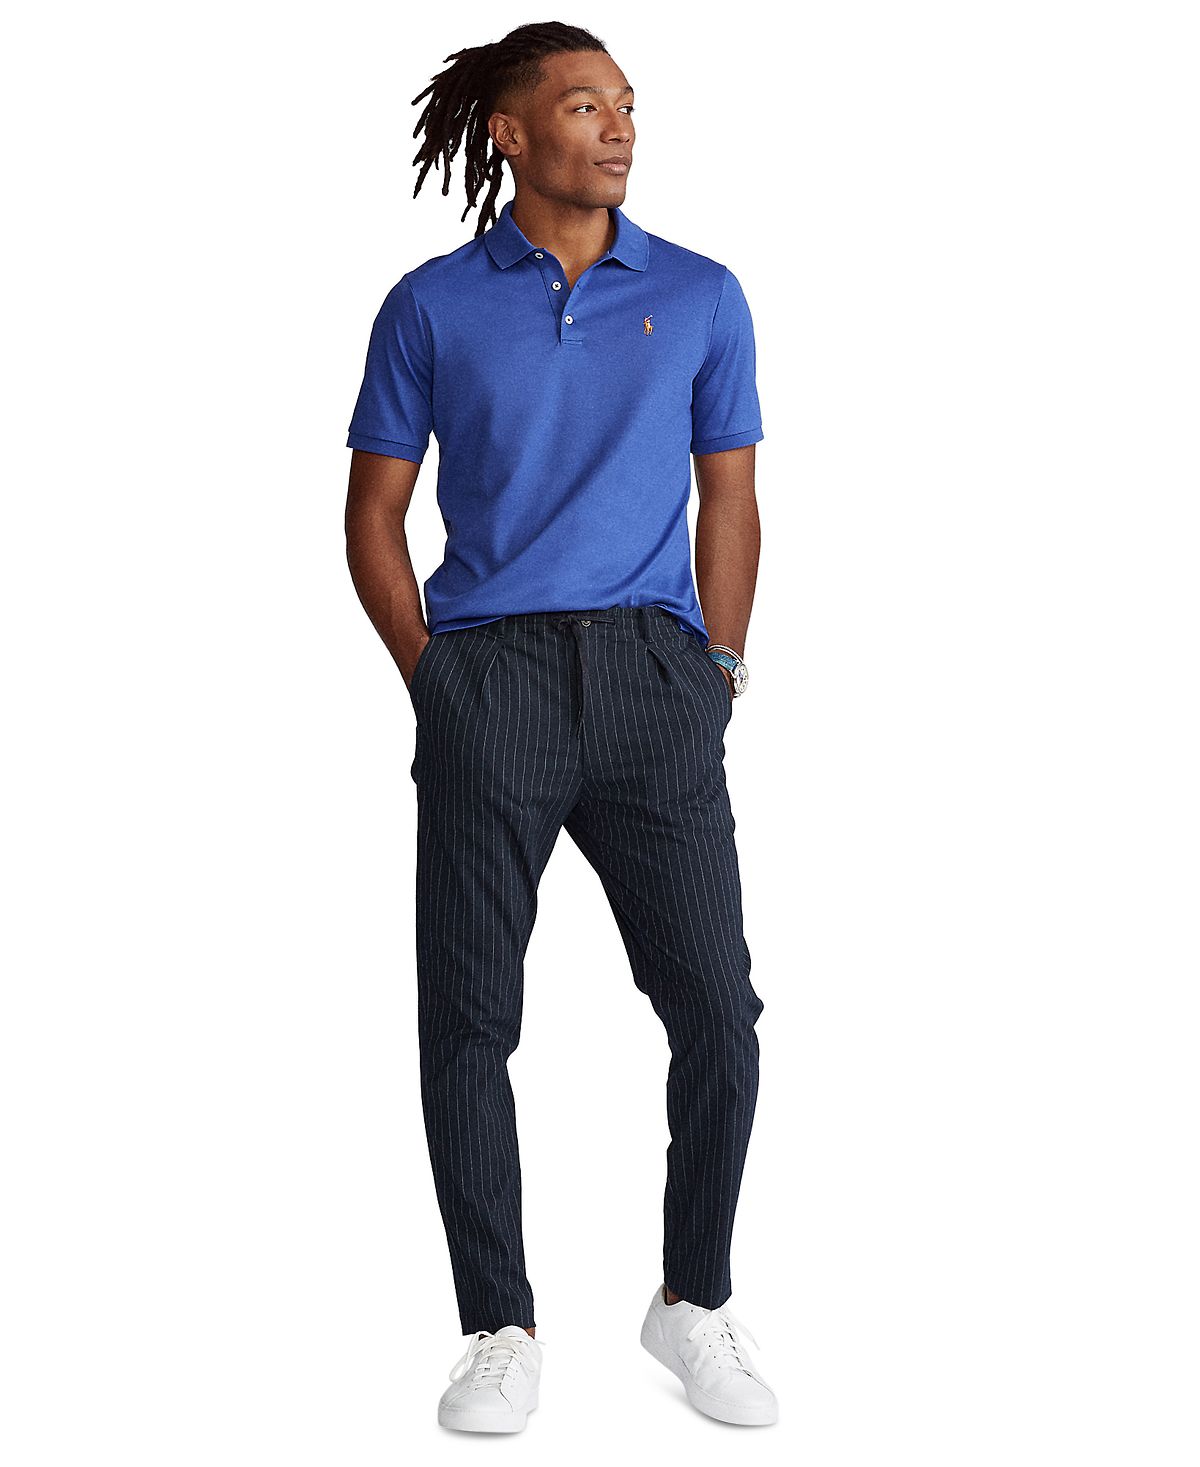 Polo Ralph Lauren Classic Fit Soft Cotton Polo Bright Navy